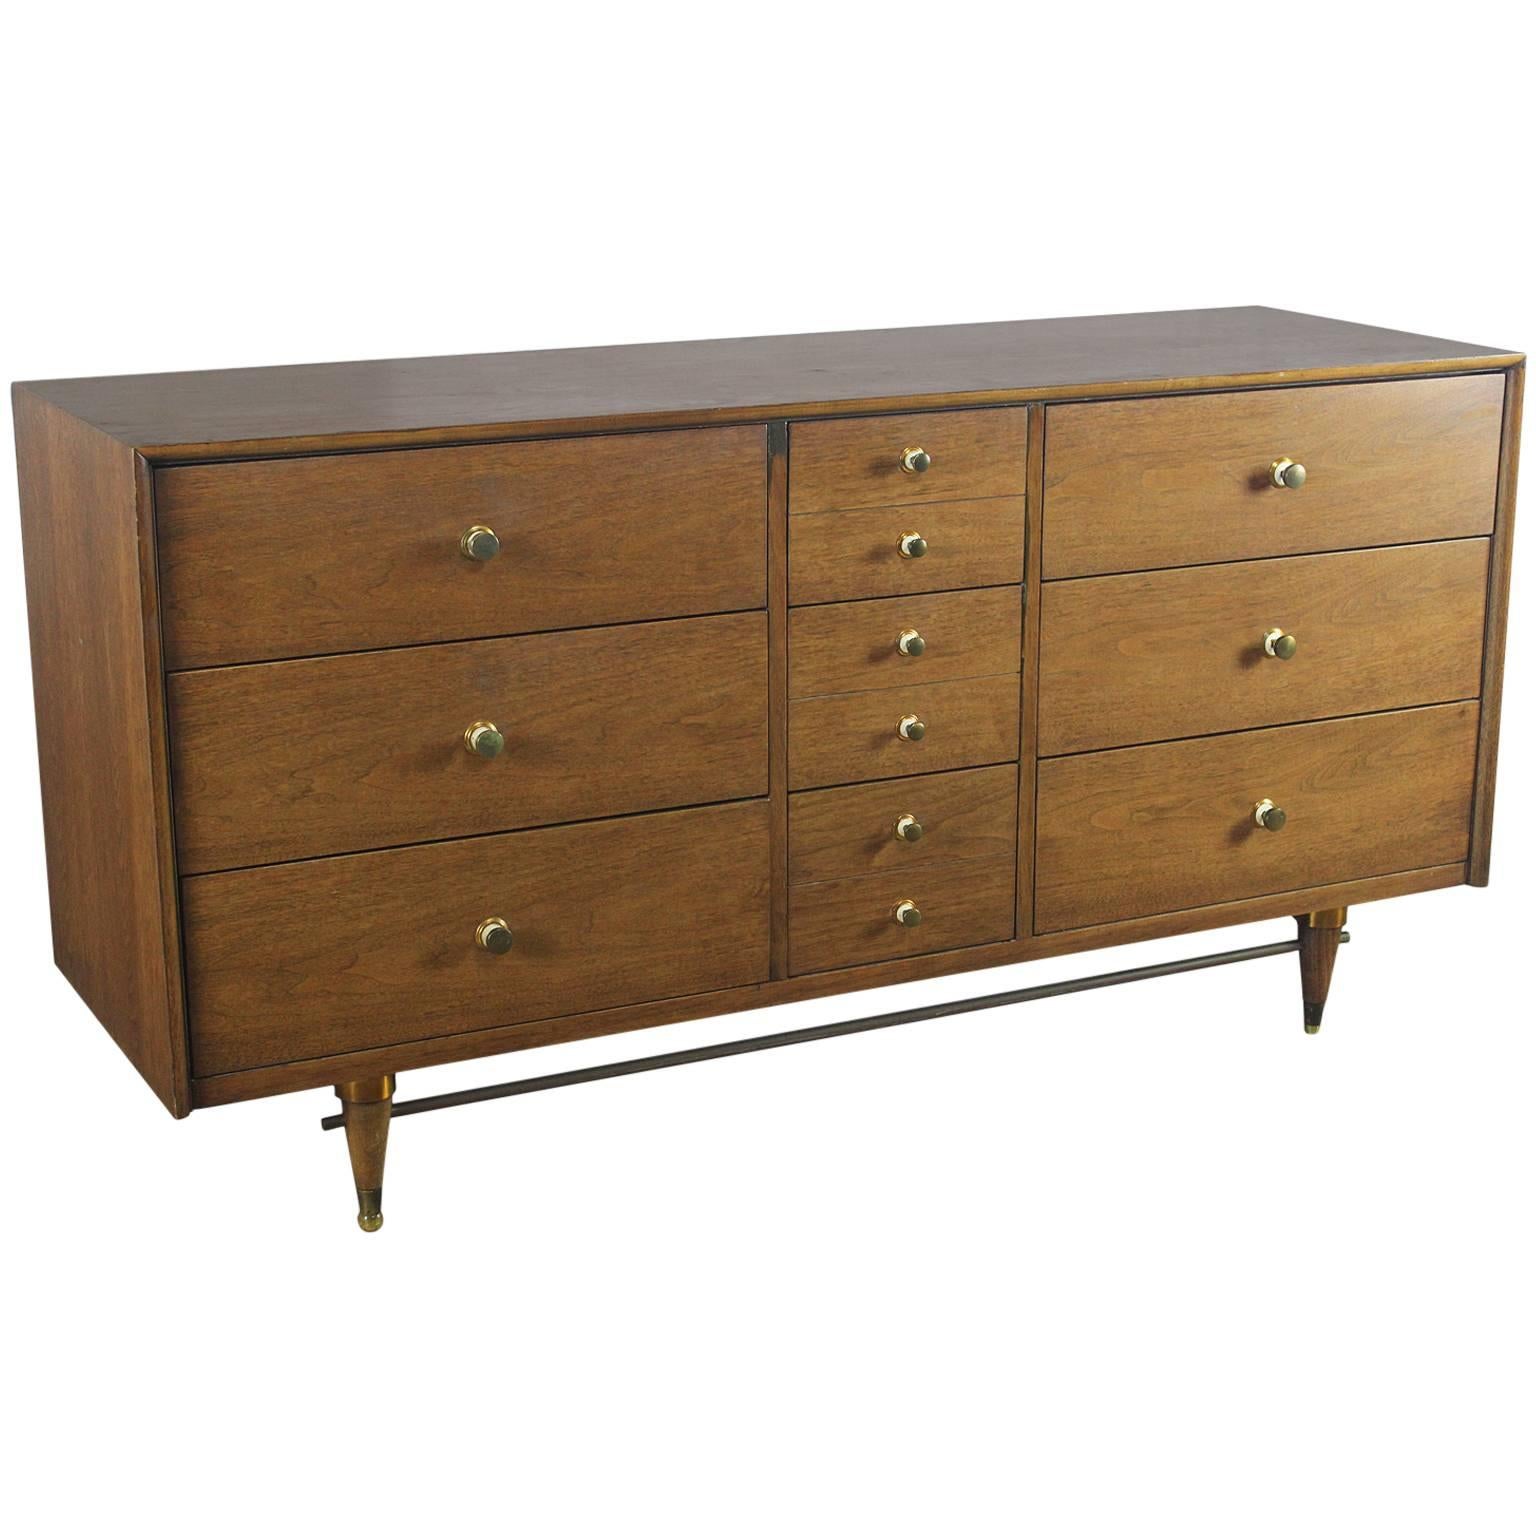 Mid-Century Modern Walnut Low Dresser Chest of Drawers by National Furniture Co.